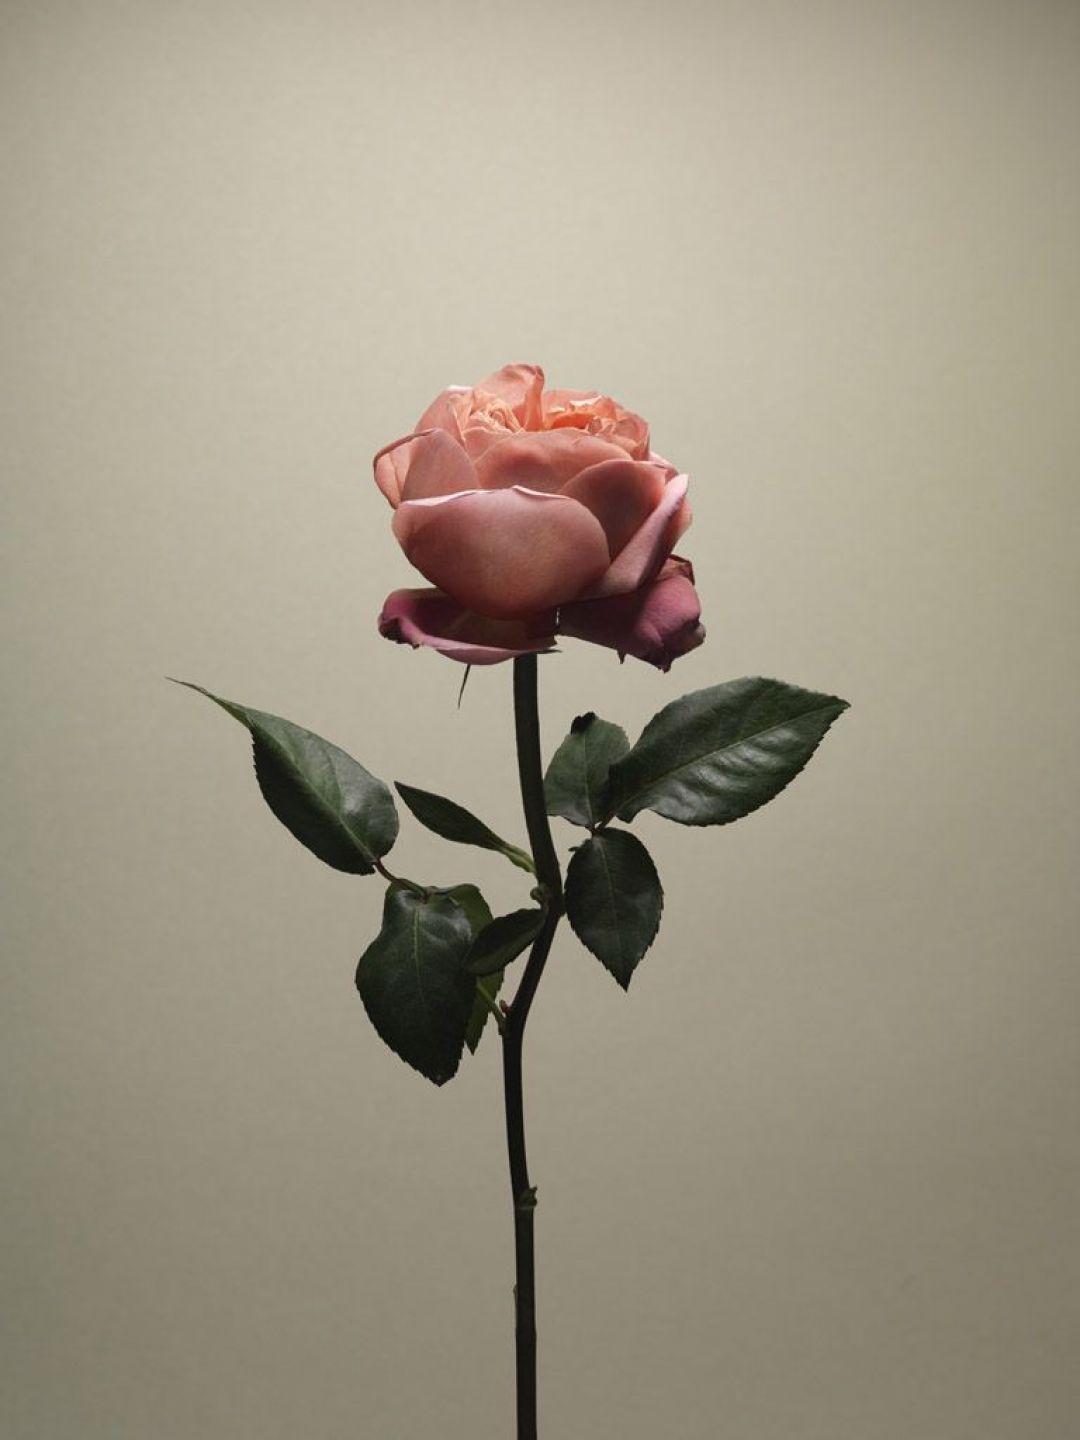 A single rose is in the center of this picture - Study